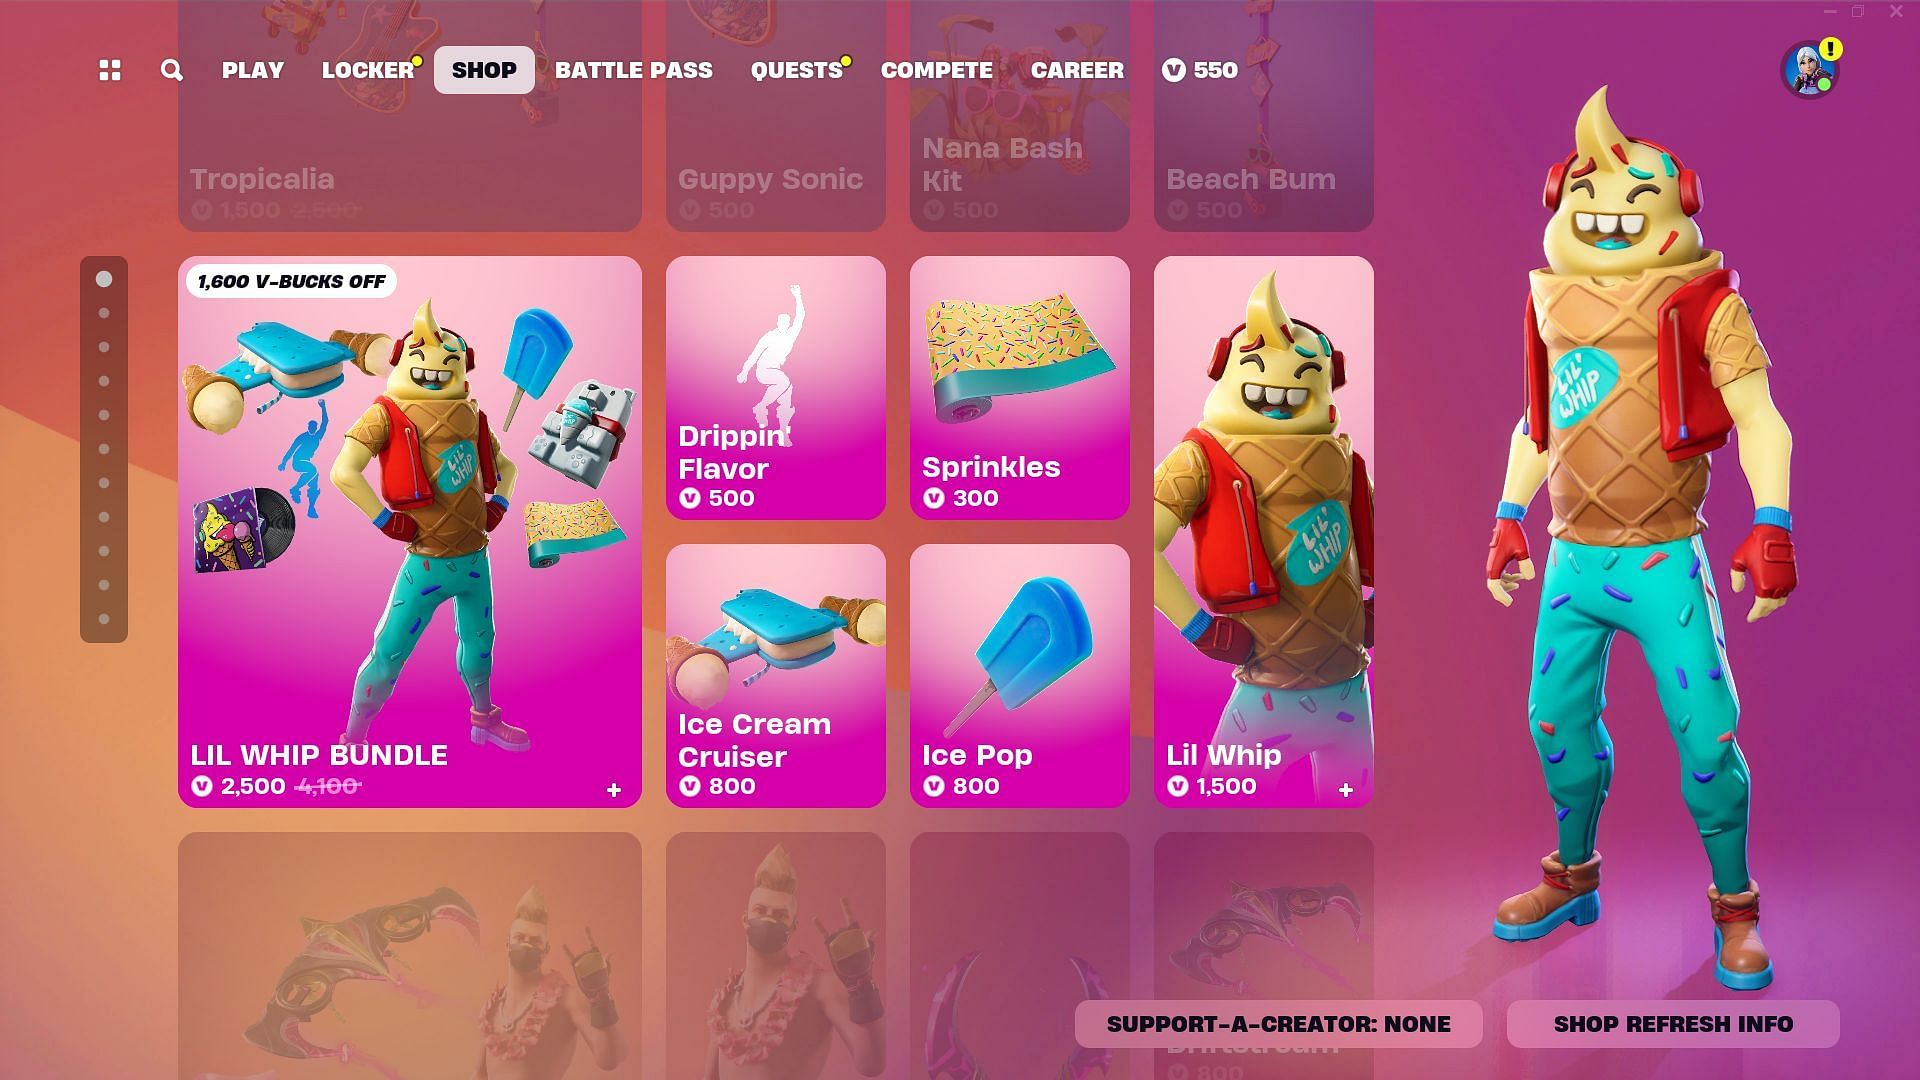 You can now purchase Lil Whip skin in Fortnite (Image via Epic Games)